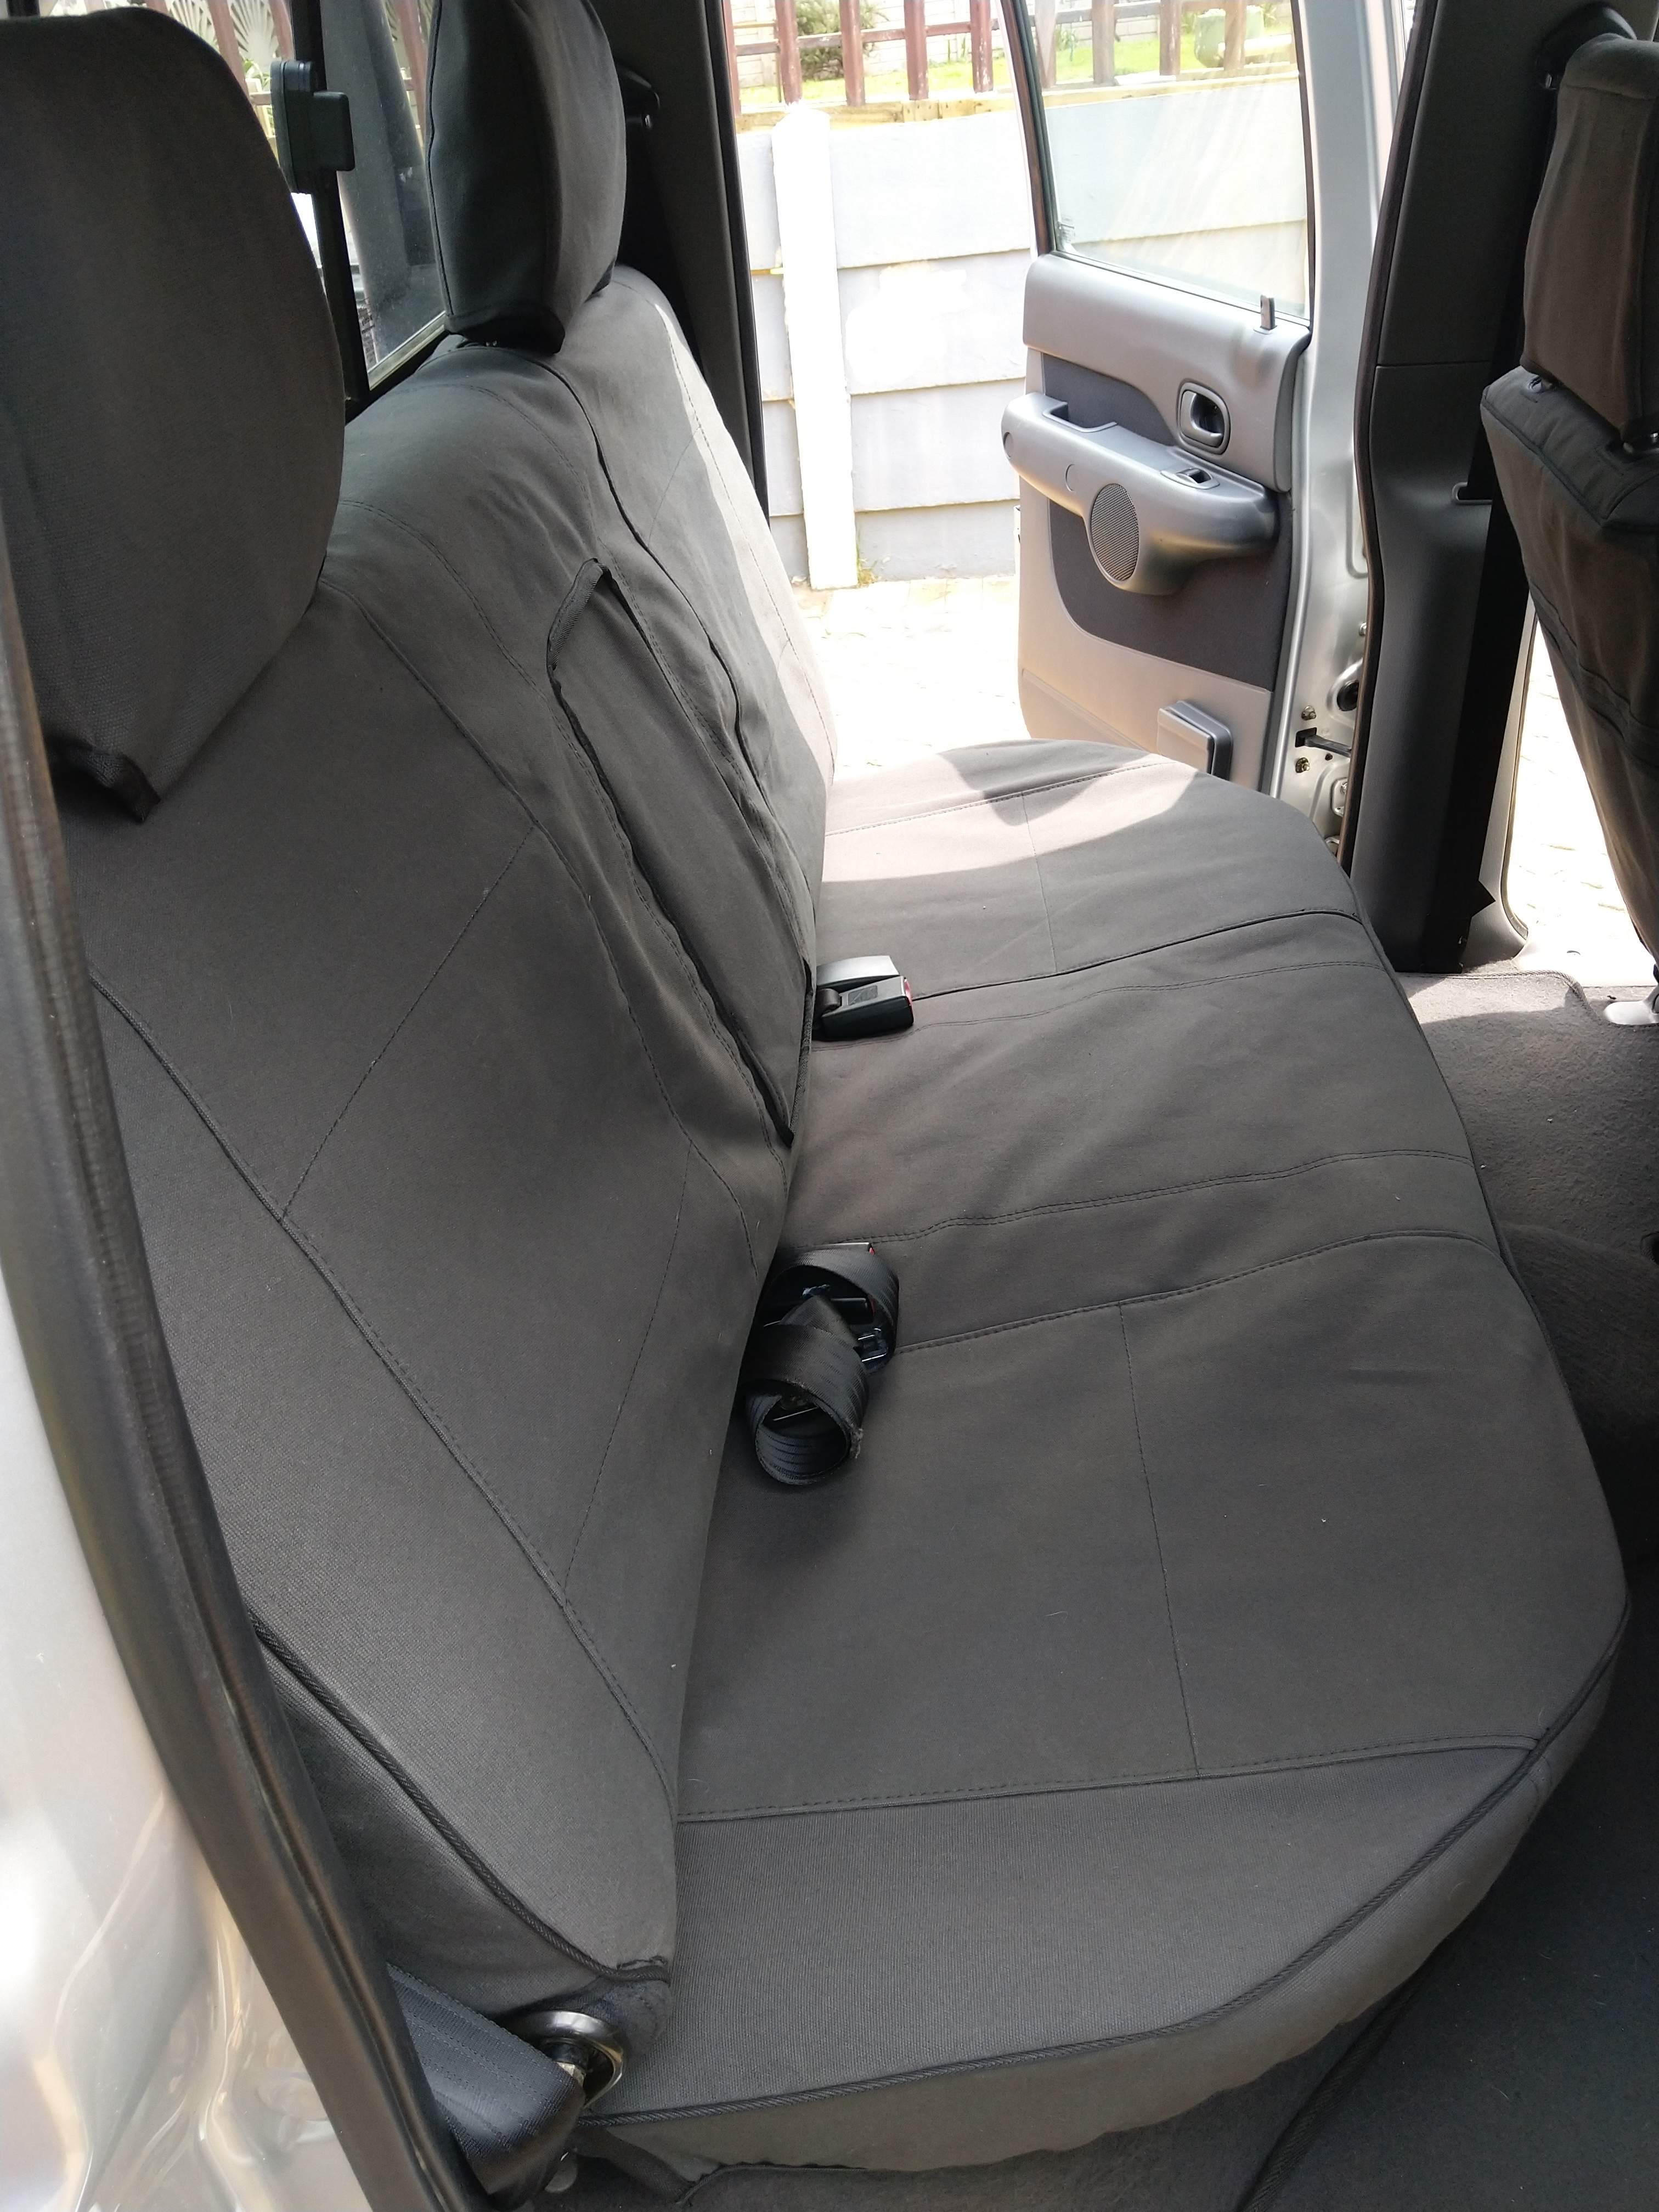 Ford Ranger Seatcover 2007 - 2011